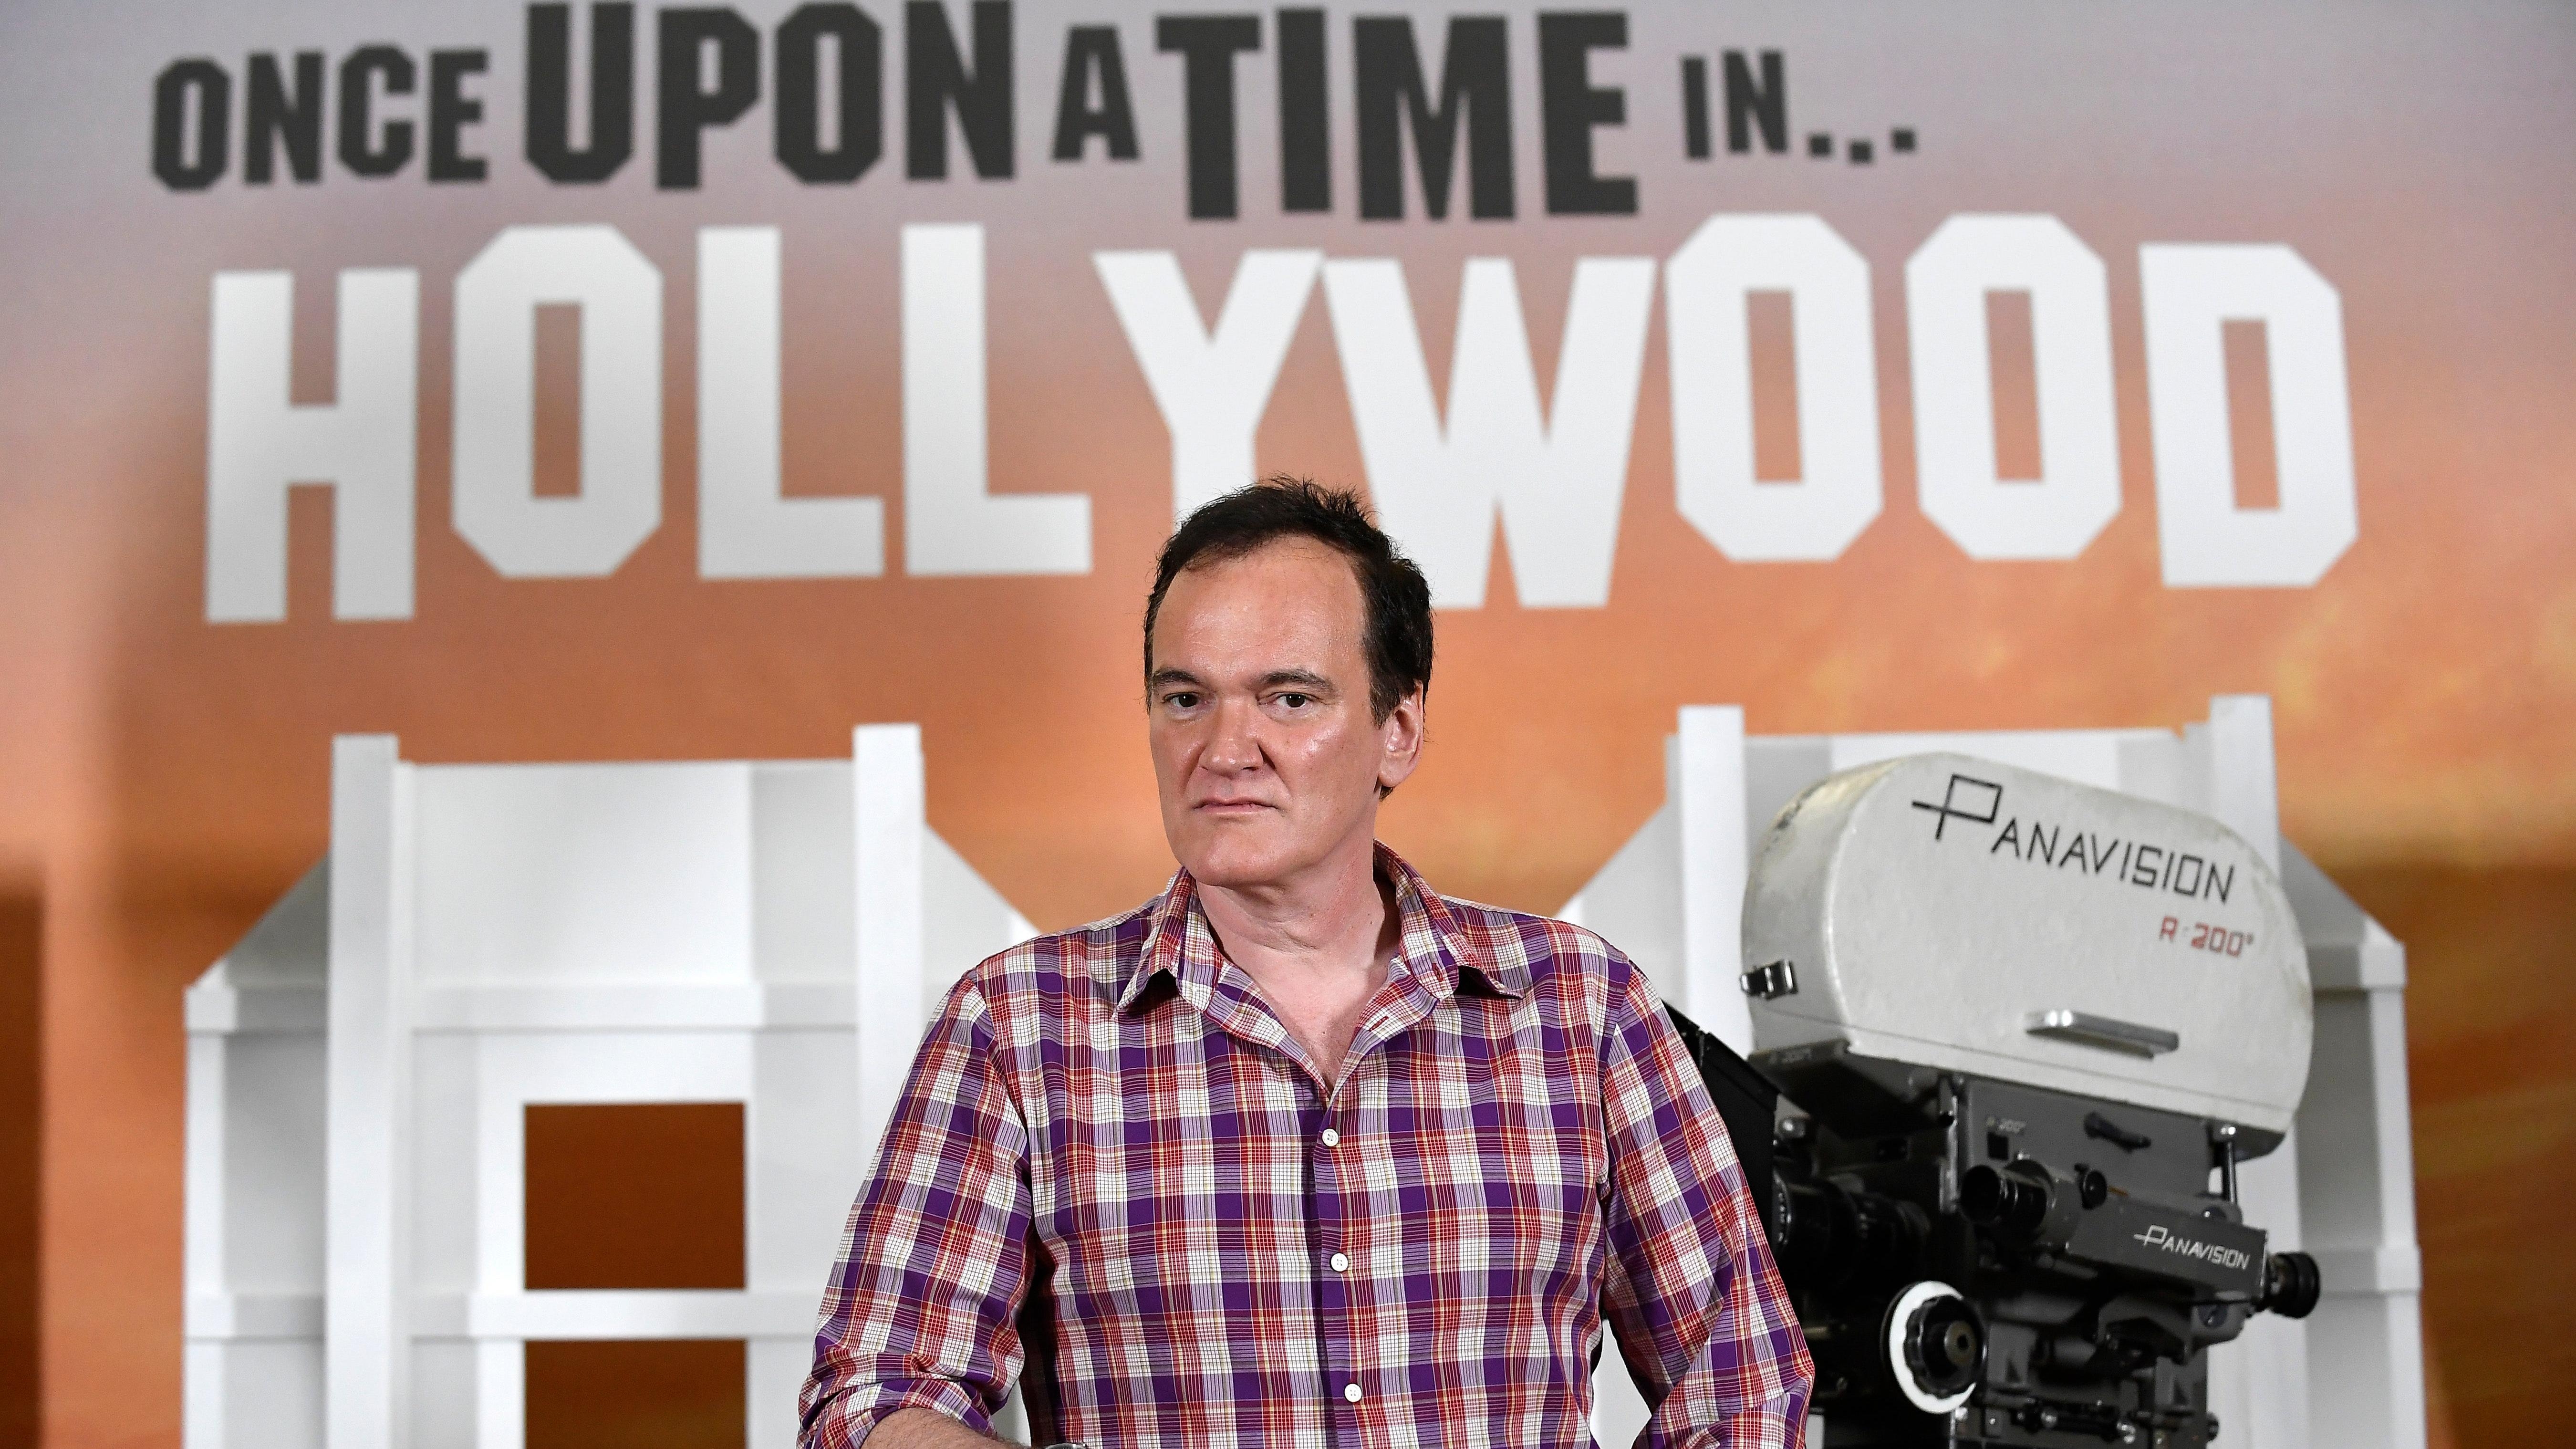 Quentin Tarantino thinks Once Upon A Time…In Hollywood would be a good movie to end his career on